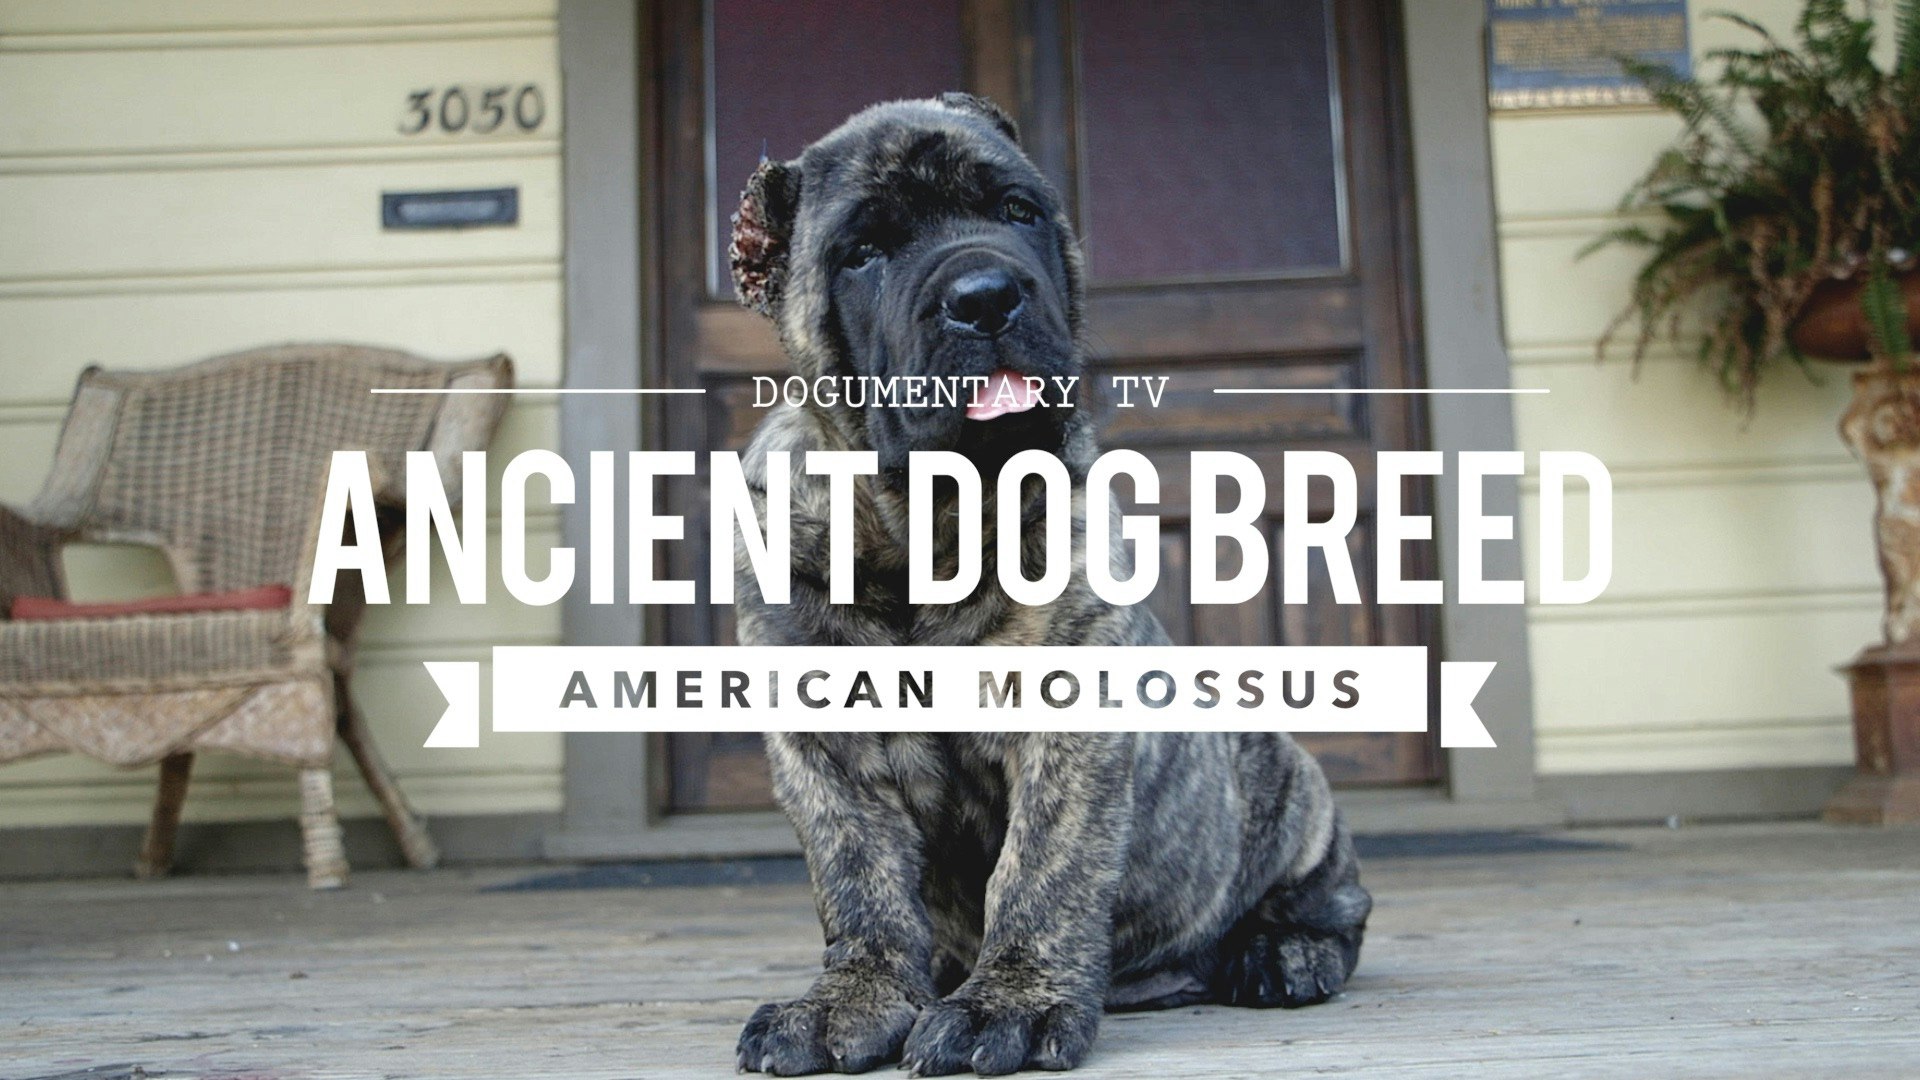 American Molossus A Recreation Of An Ancient Dog Breed Dog Breed Documentaries Dogumentary Tv